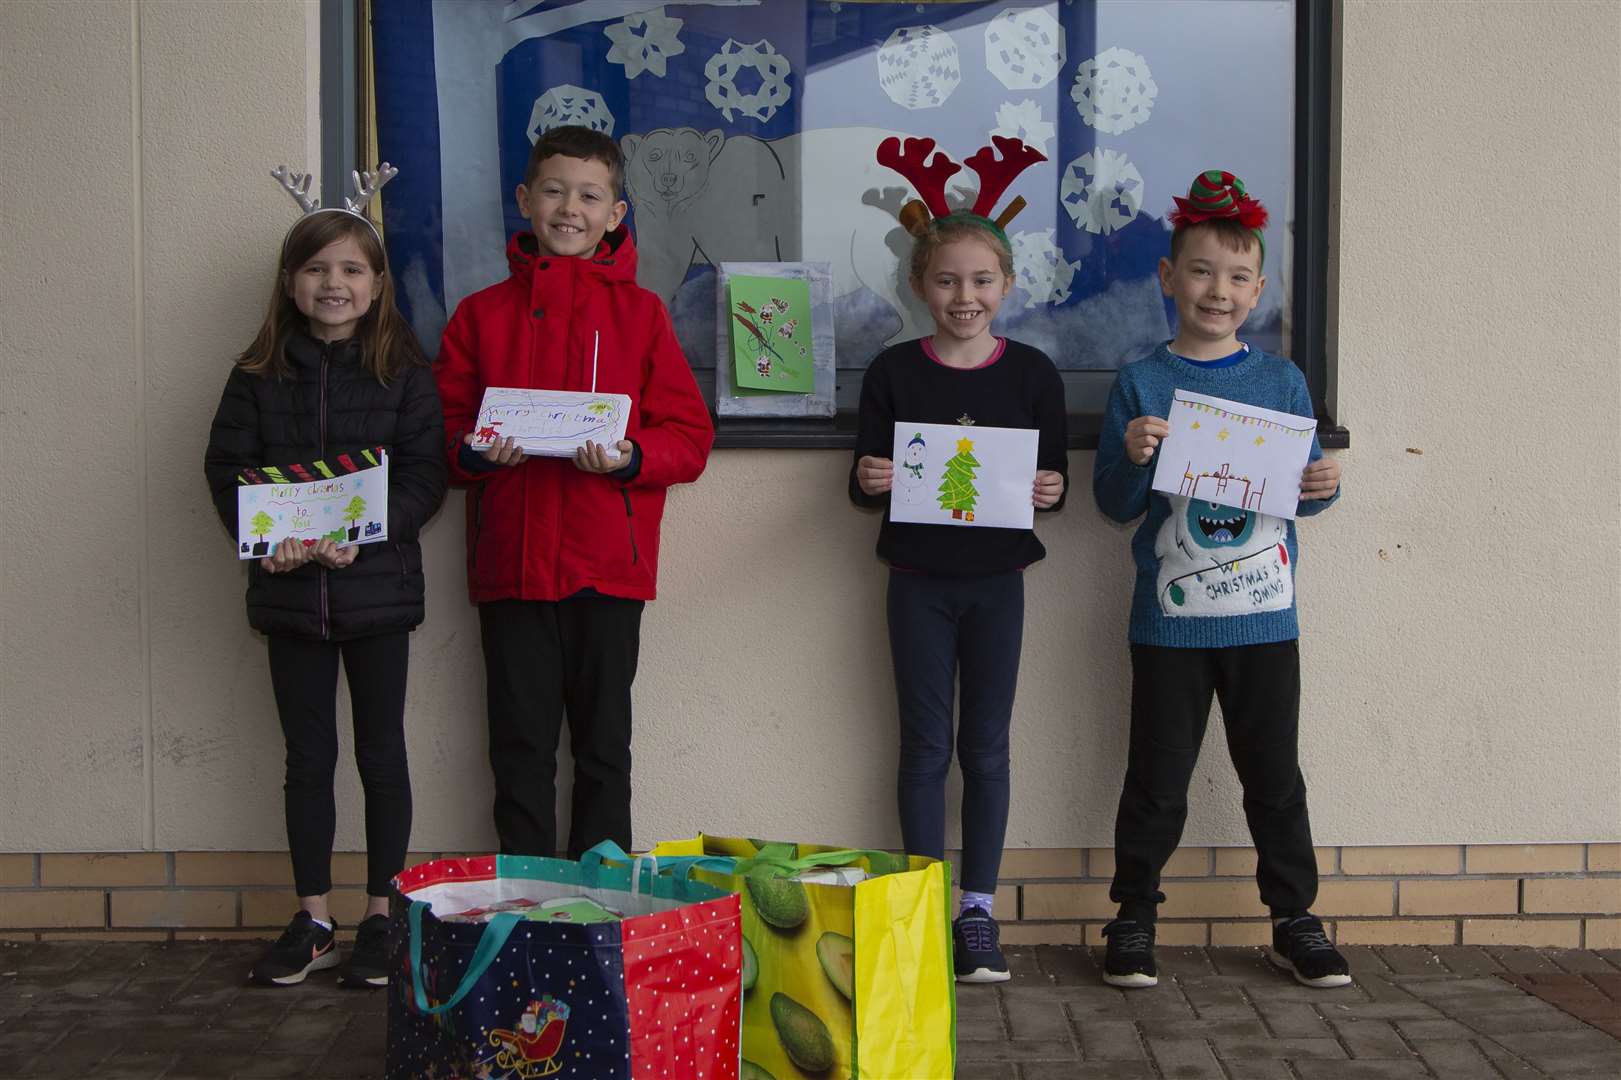 Kintore Primary School pupils Hannah, Charlie, Katie and Lewis with the Christmas cards they made. Picture: Paul Douglas.